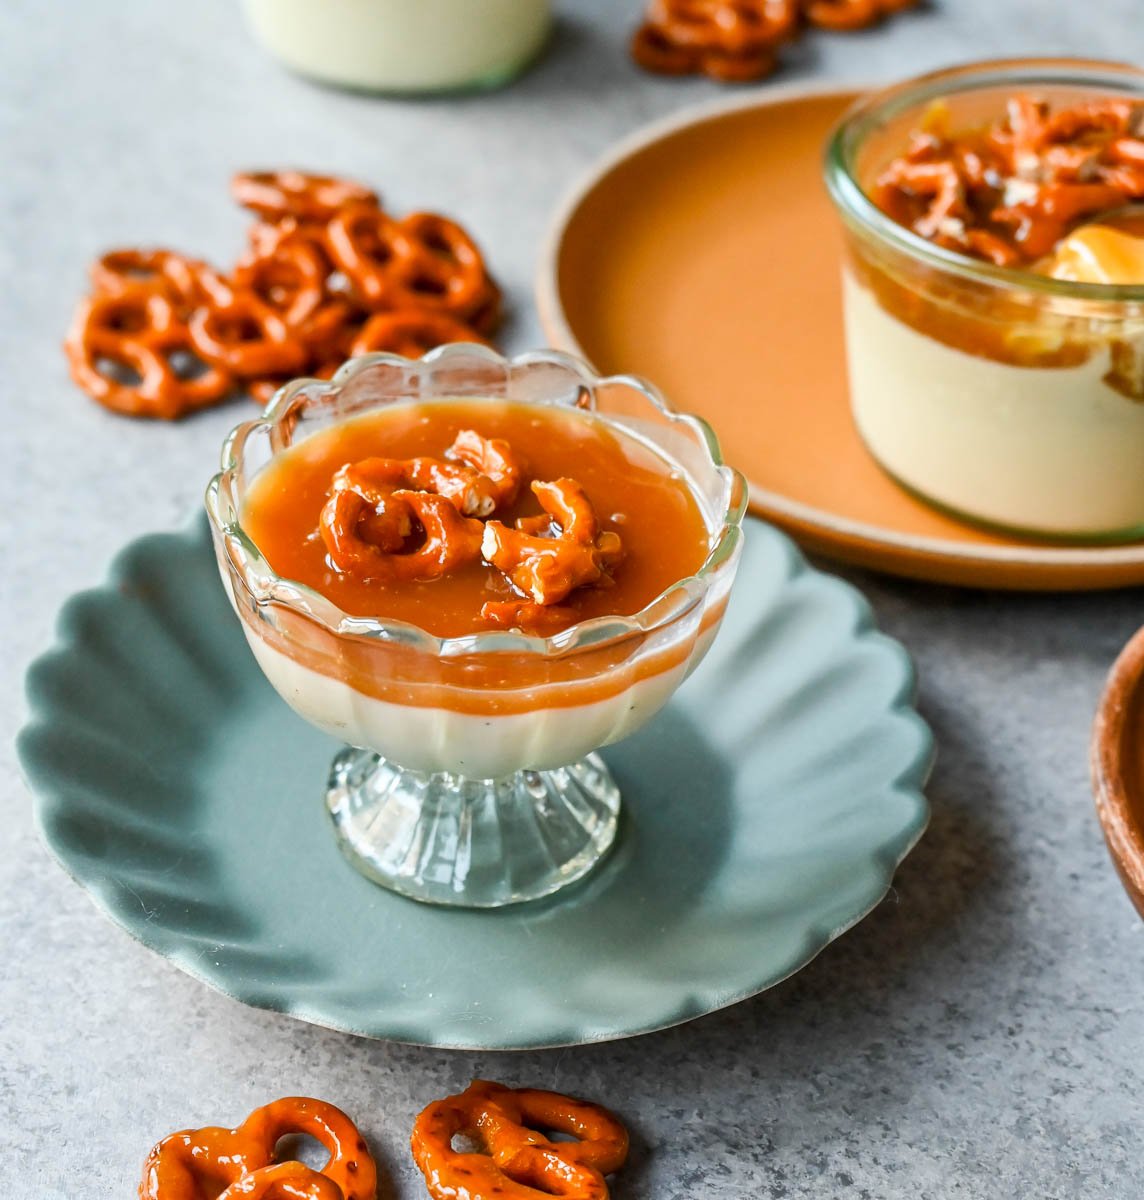 Panna Cotta with Salted Caramel and Toffee Pretzels. Creamy, rich vanilla panna cotta with homemade sea salt caramel and butter toffee pretzels. This is the perfect sweet and salty dessert!